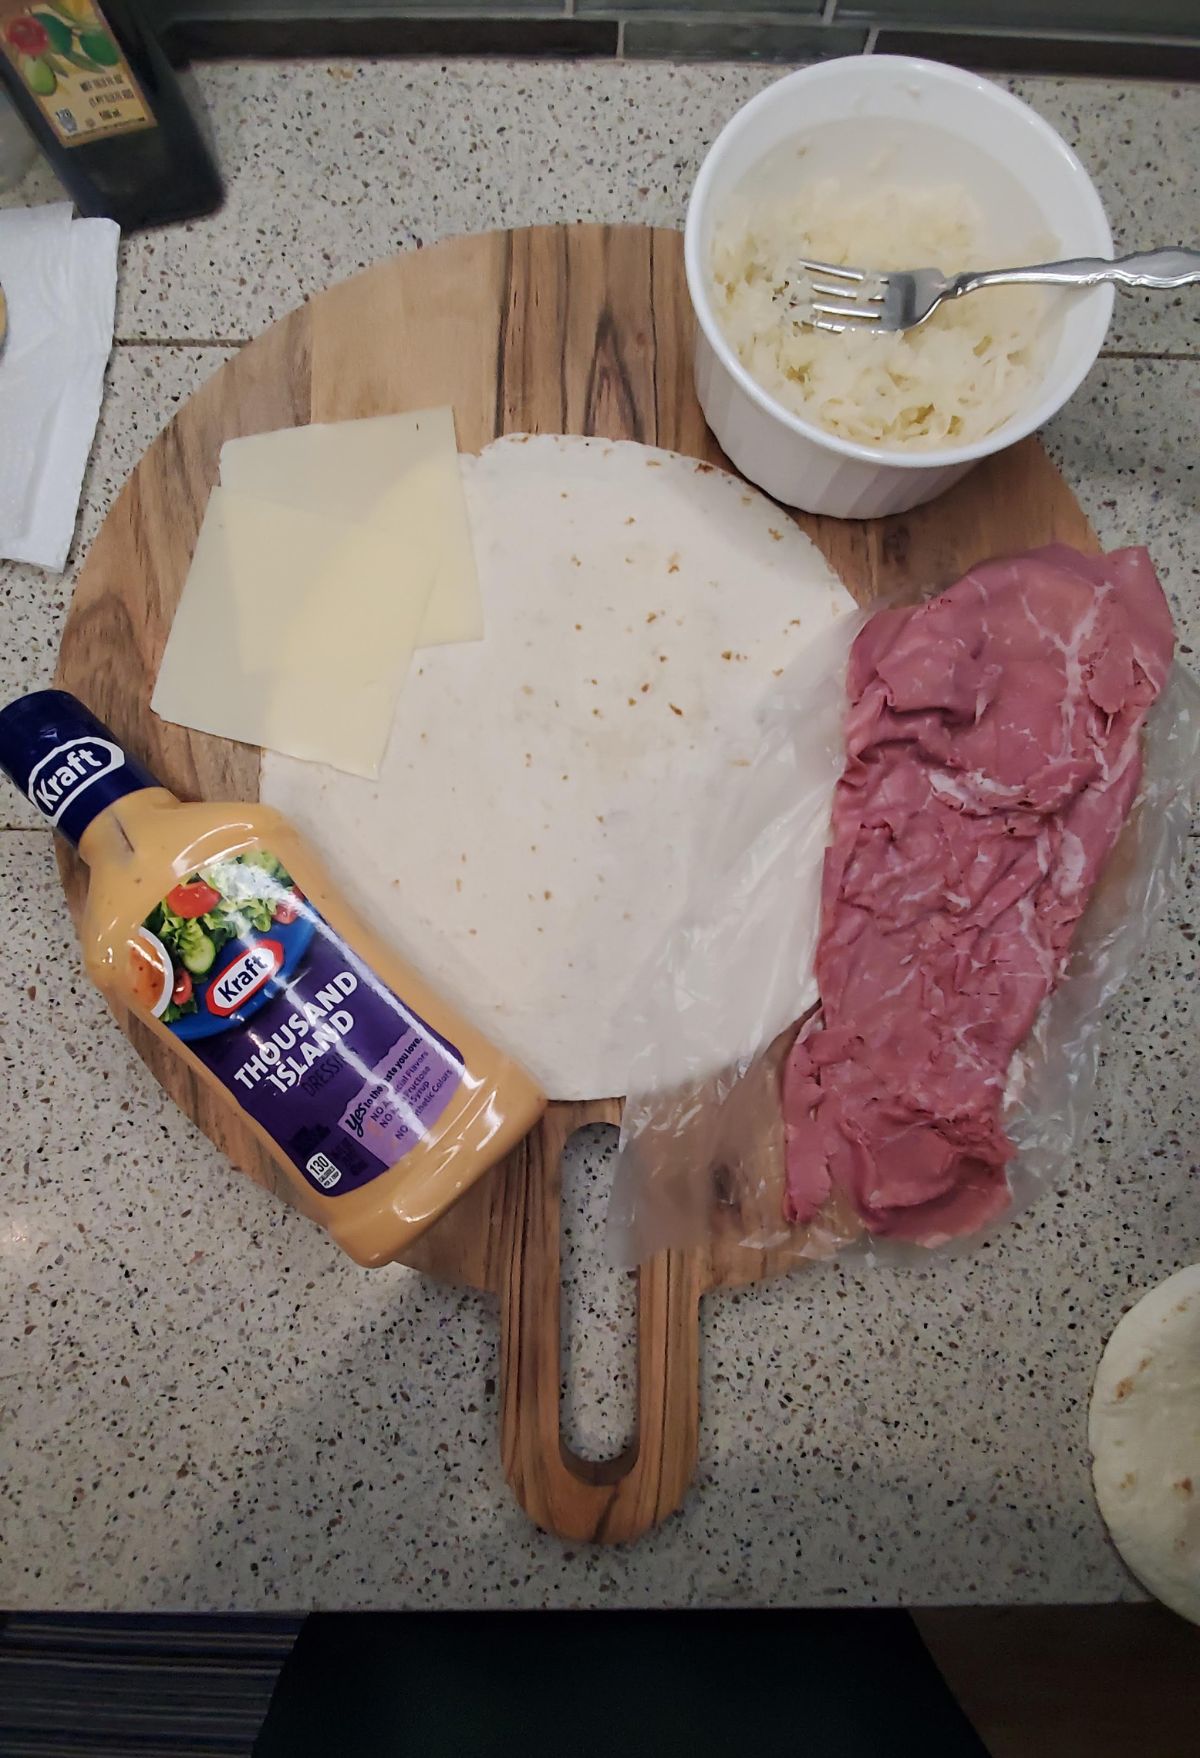 Ingredients for a sandwich laid out on a wooden cutting board, including roast beef, cheese slices, a tortilla, mayonnaise, and a side of coleslaw.